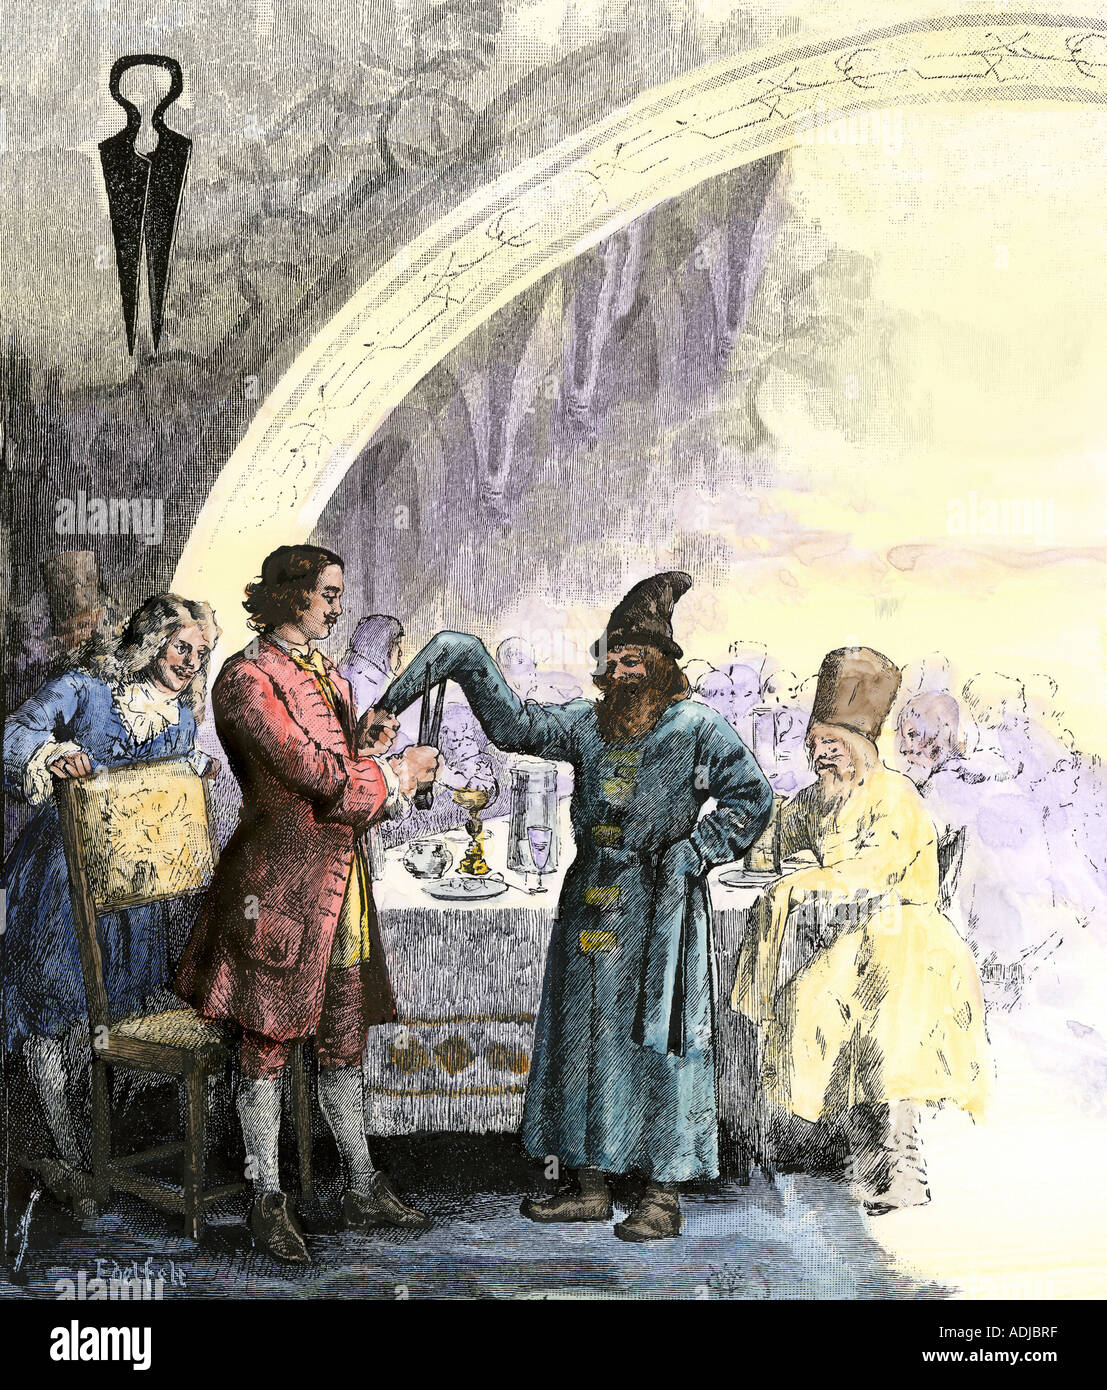 Tsar Peter I cutting the long sleeves of the boyars symbolically reducing the nobles' power. Hand-colored woodcut Stock Photo